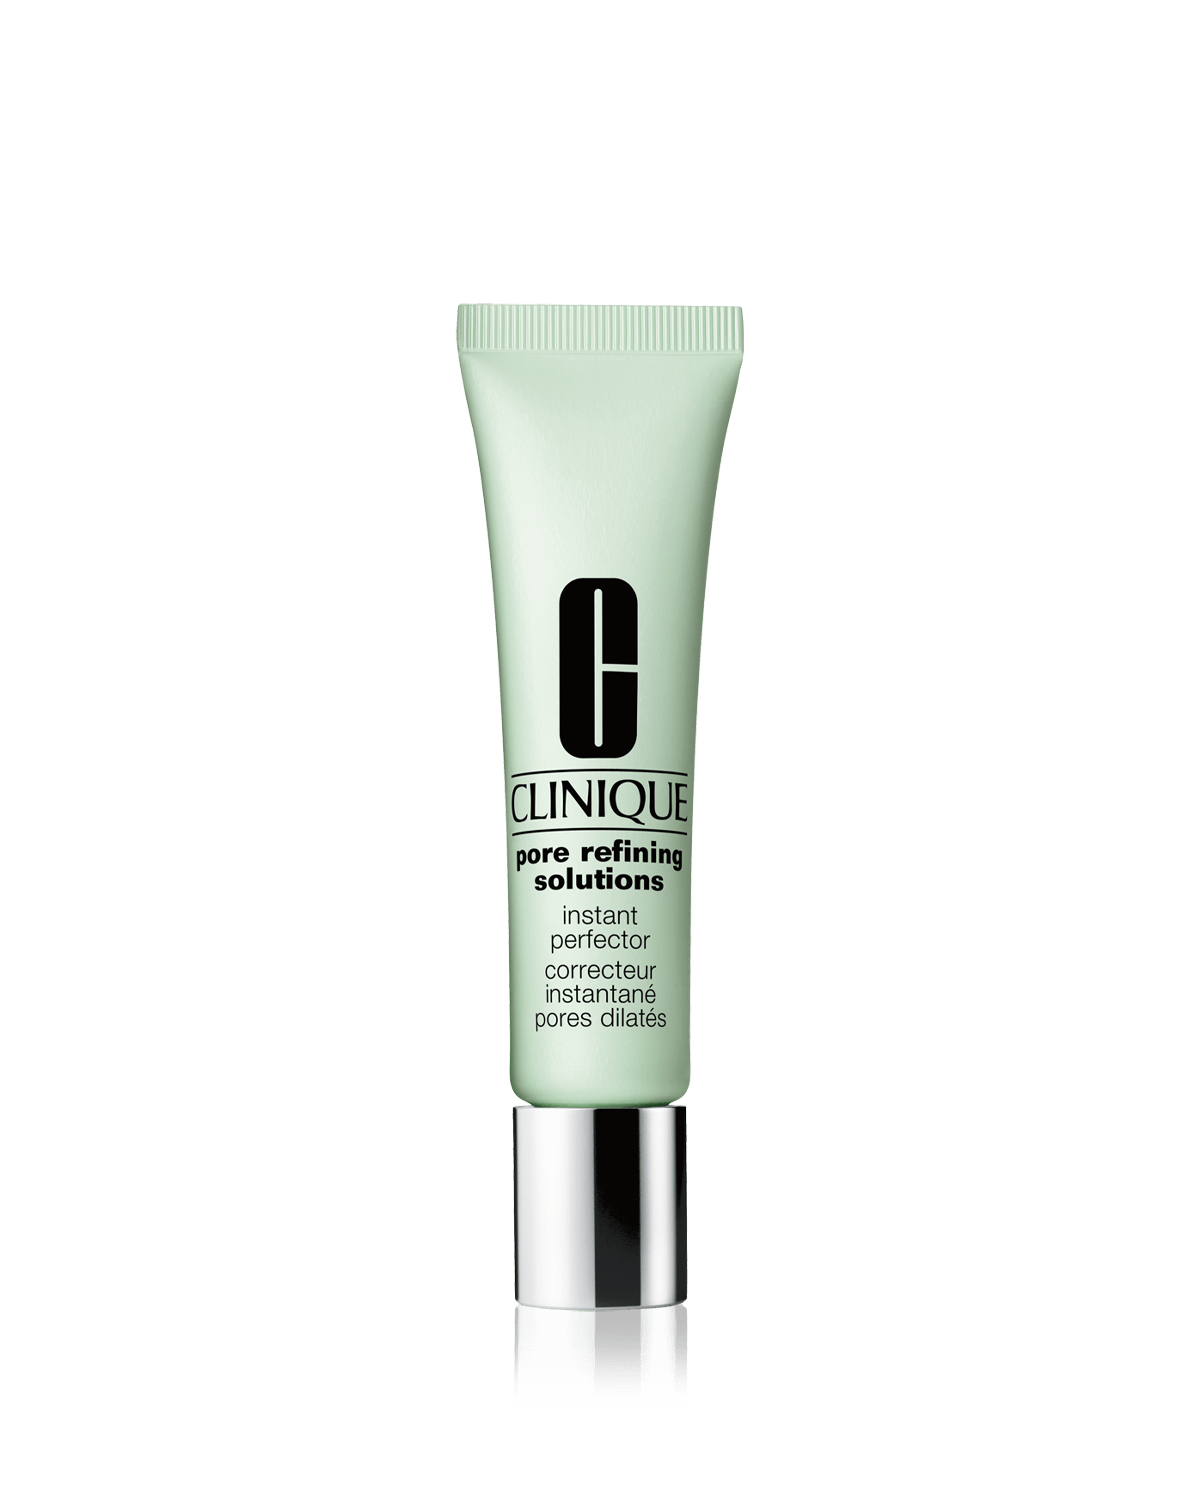 Pore Refining Solutions Instant Perfector